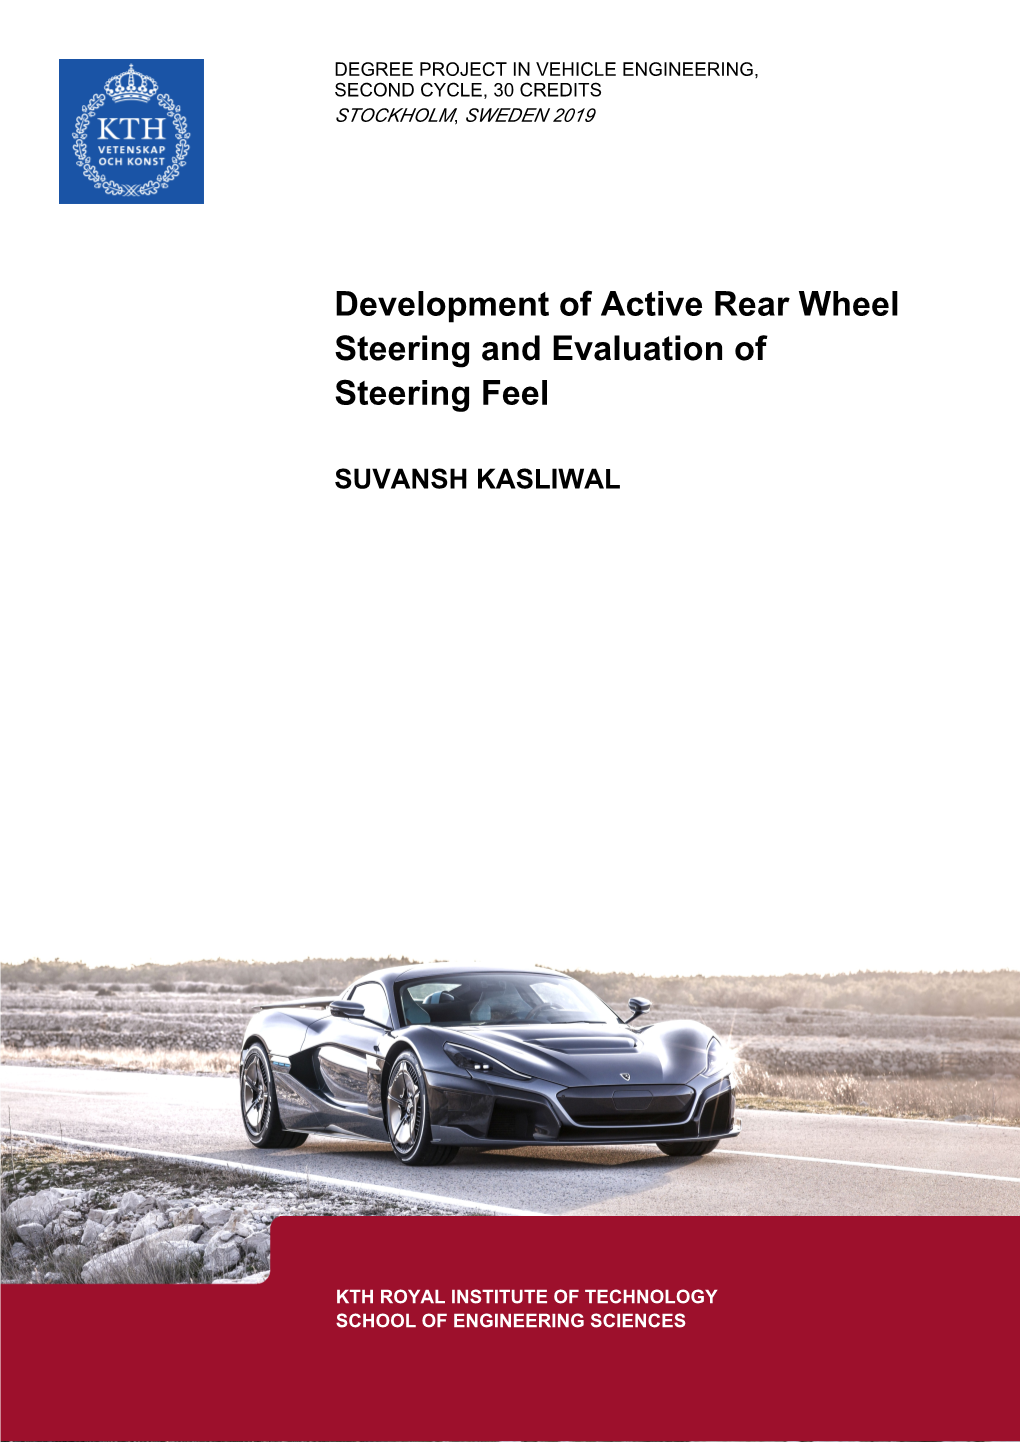 Development of Active Rear Wheel Steering and Evaluation of Steering Feel